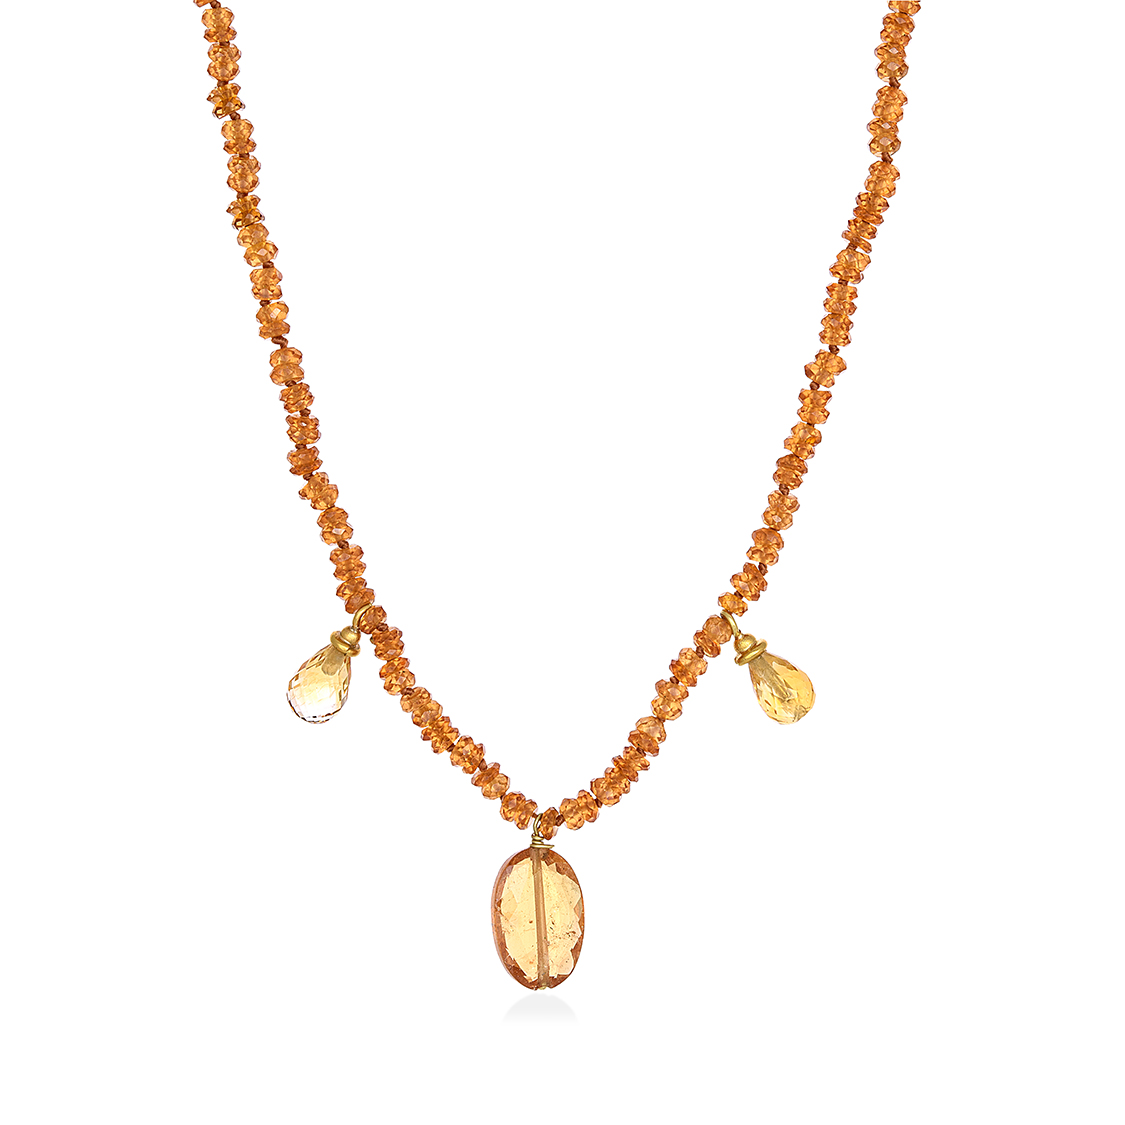 Necklace with citrines